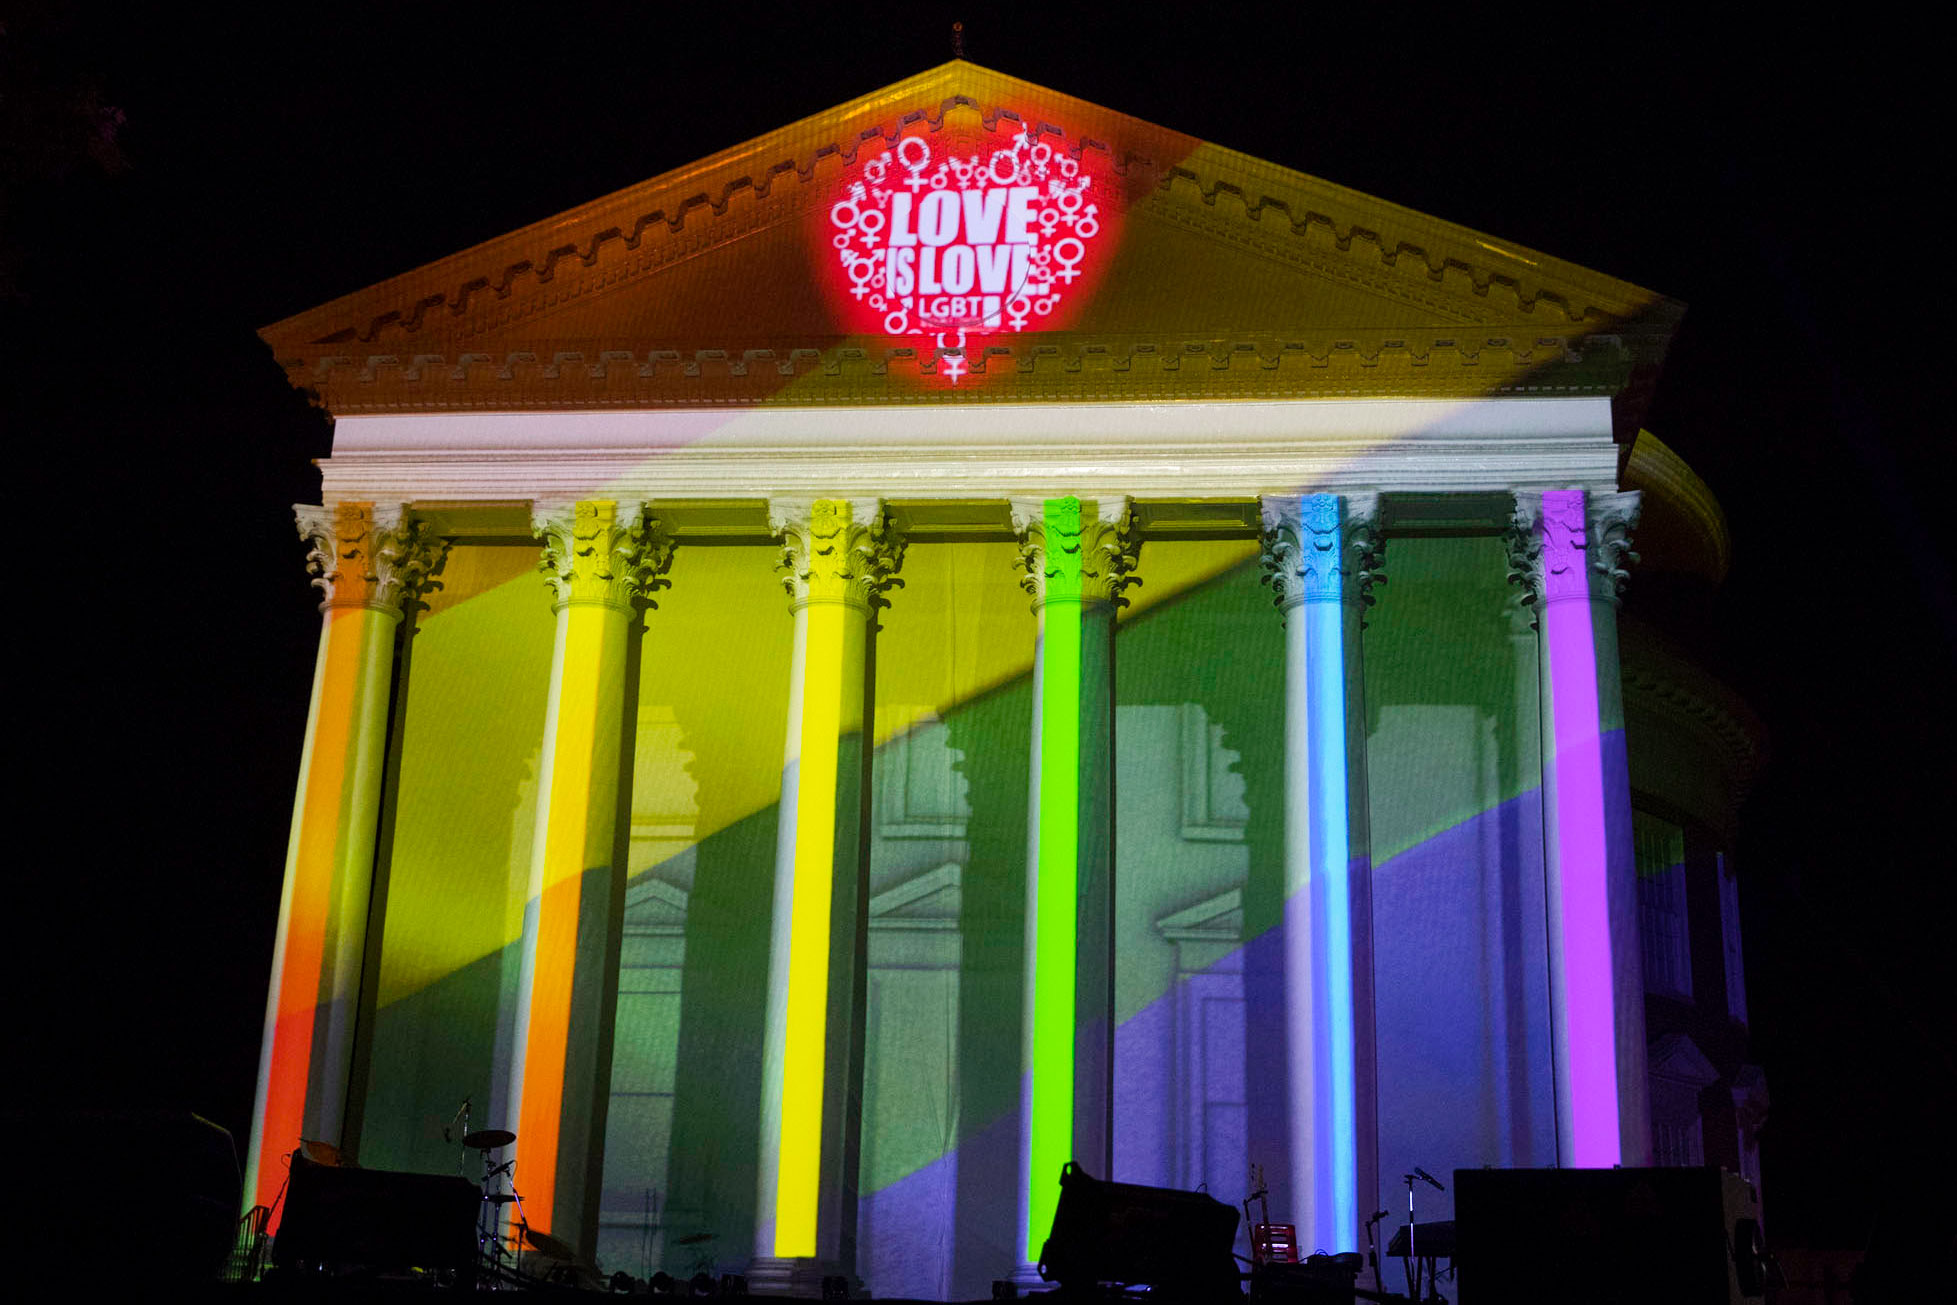 The Rotunda lit up in rainbow colors with text that reads Love is Love LGBT over the clock